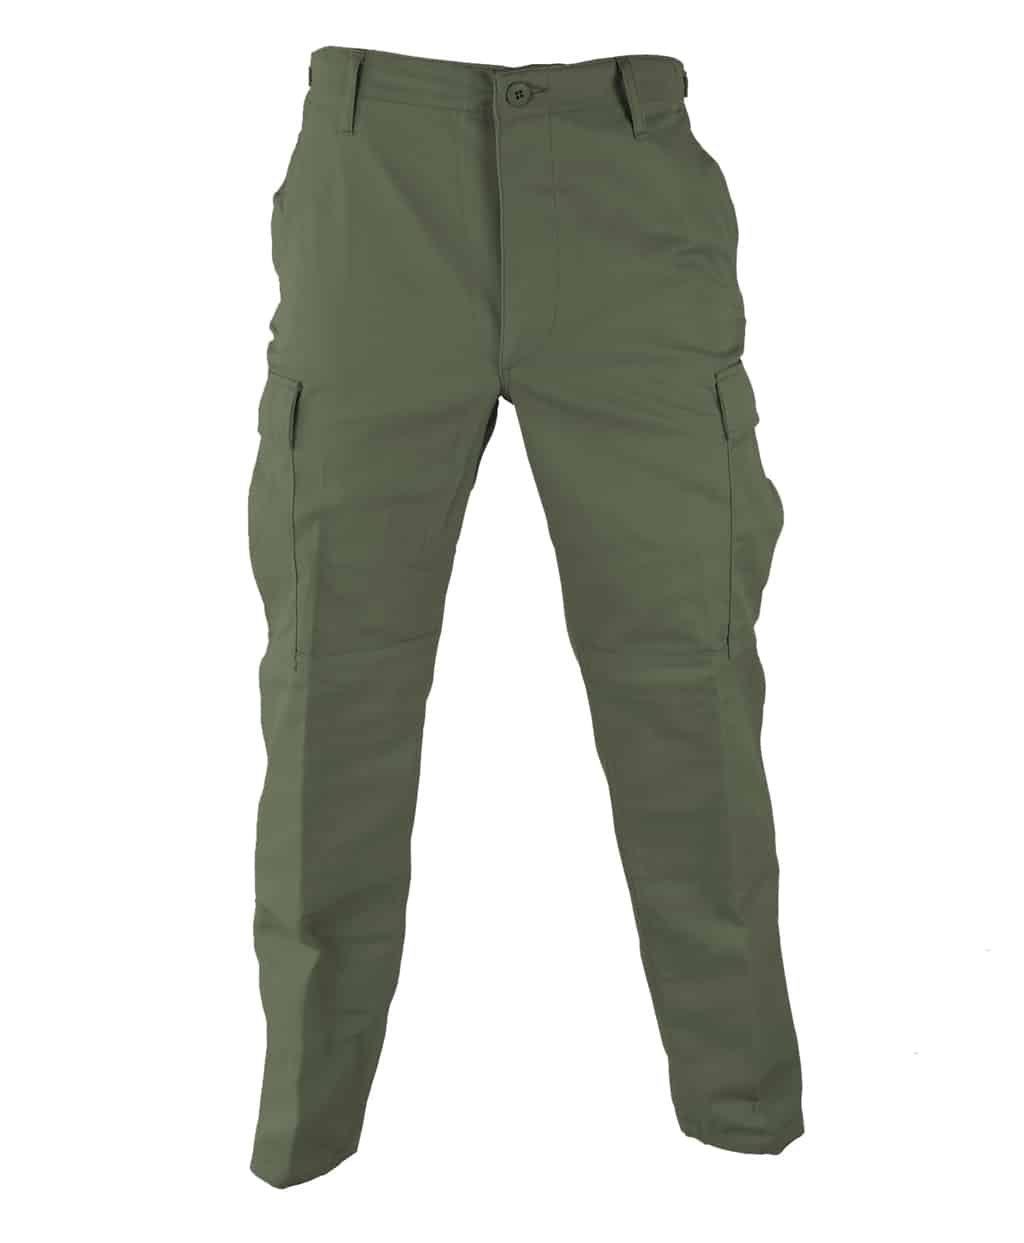 Propper BDU Trousers Mens Button Fly Polycotton Twill Army Military Pants Olive 